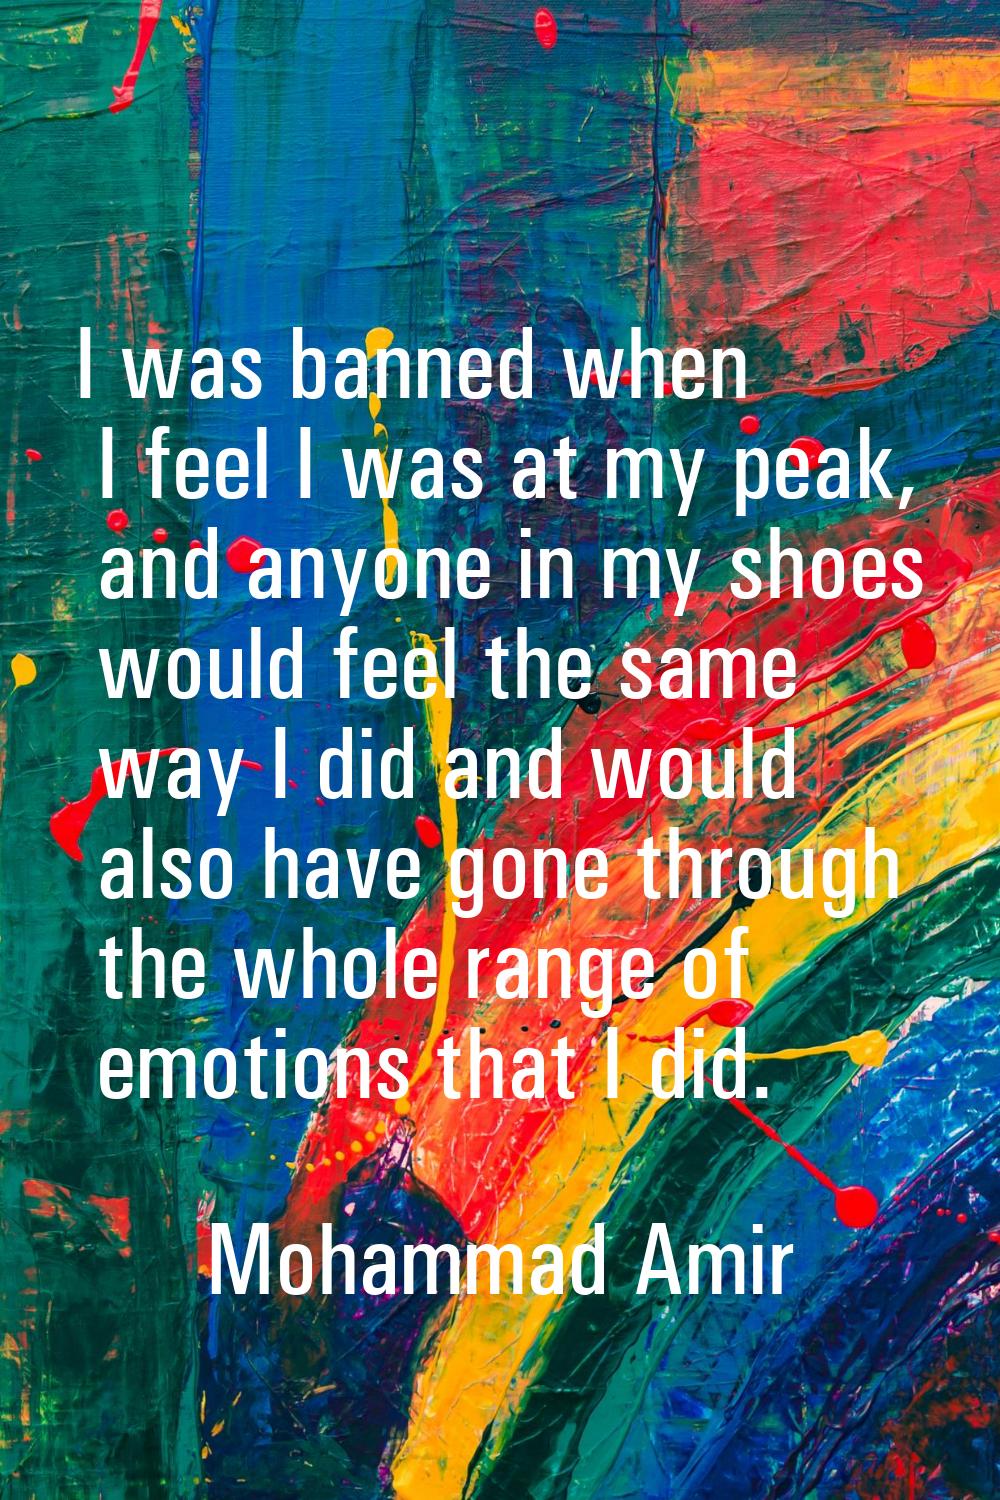 I was banned when I feel I was at my peak, and anyone in my shoes would feel the same way I did and